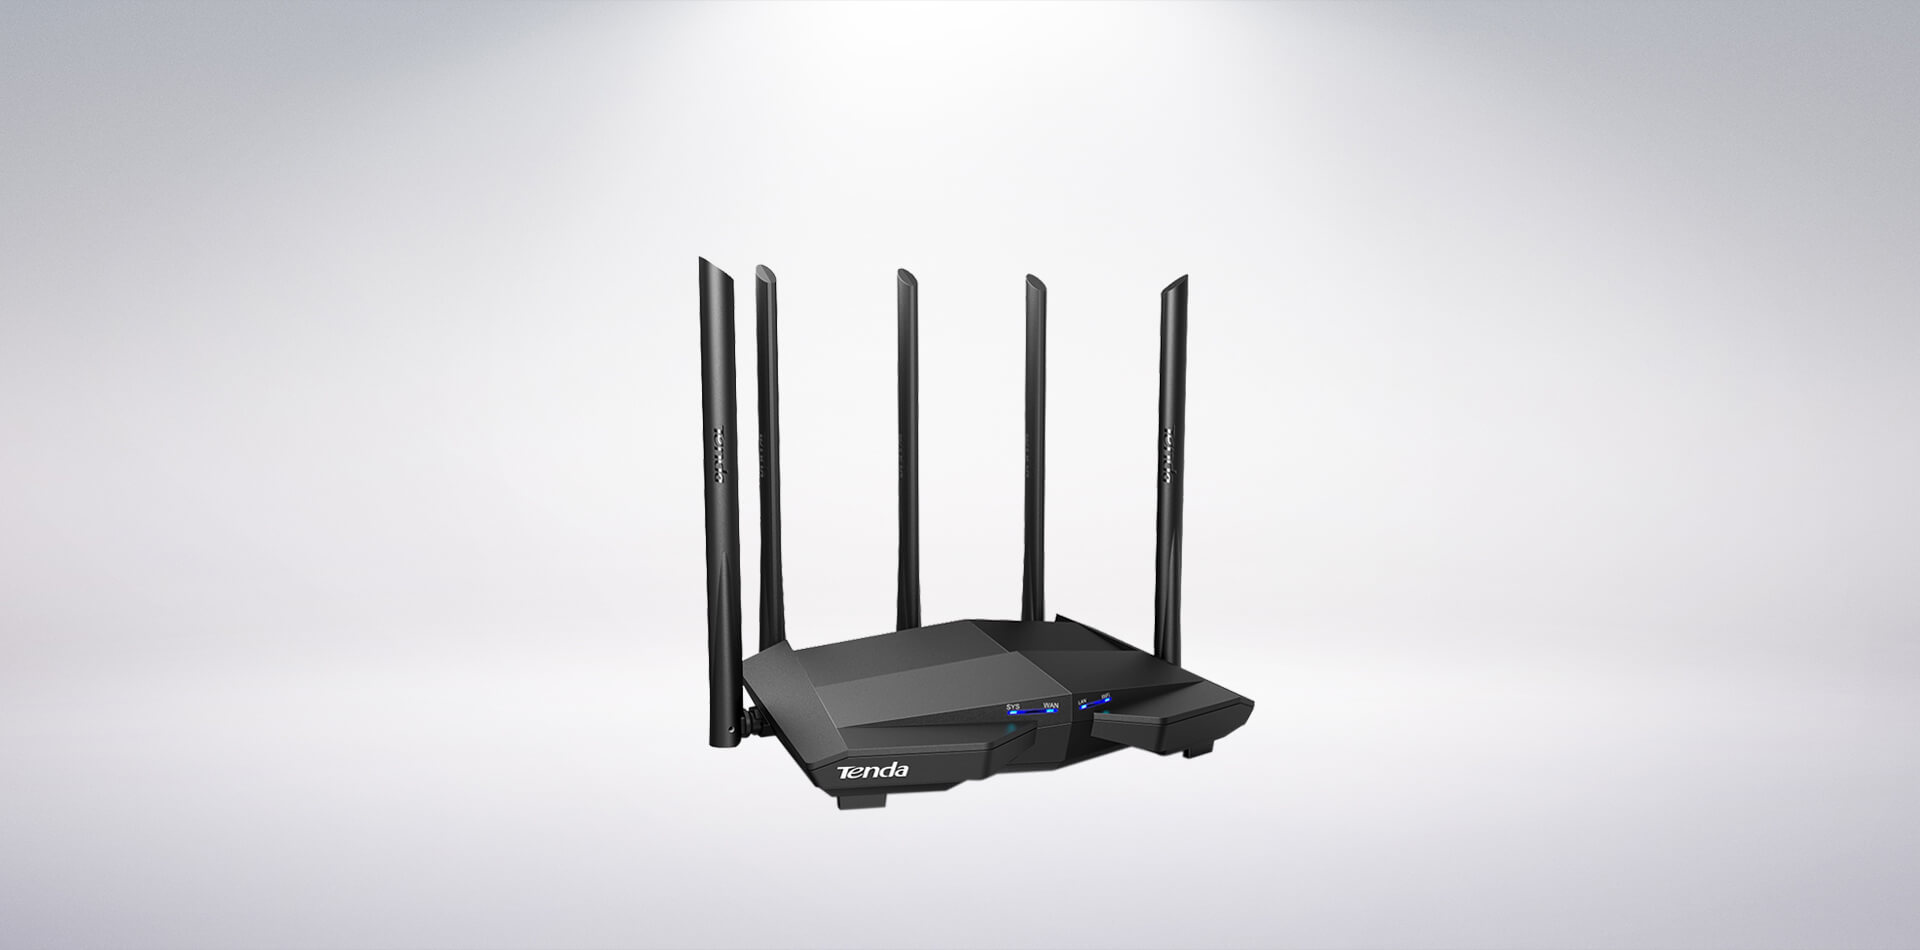 Really solo dictionary AC11 AC1200 Dual Band Gigabit WiFi Router-Tenda-All For Better NetWorking